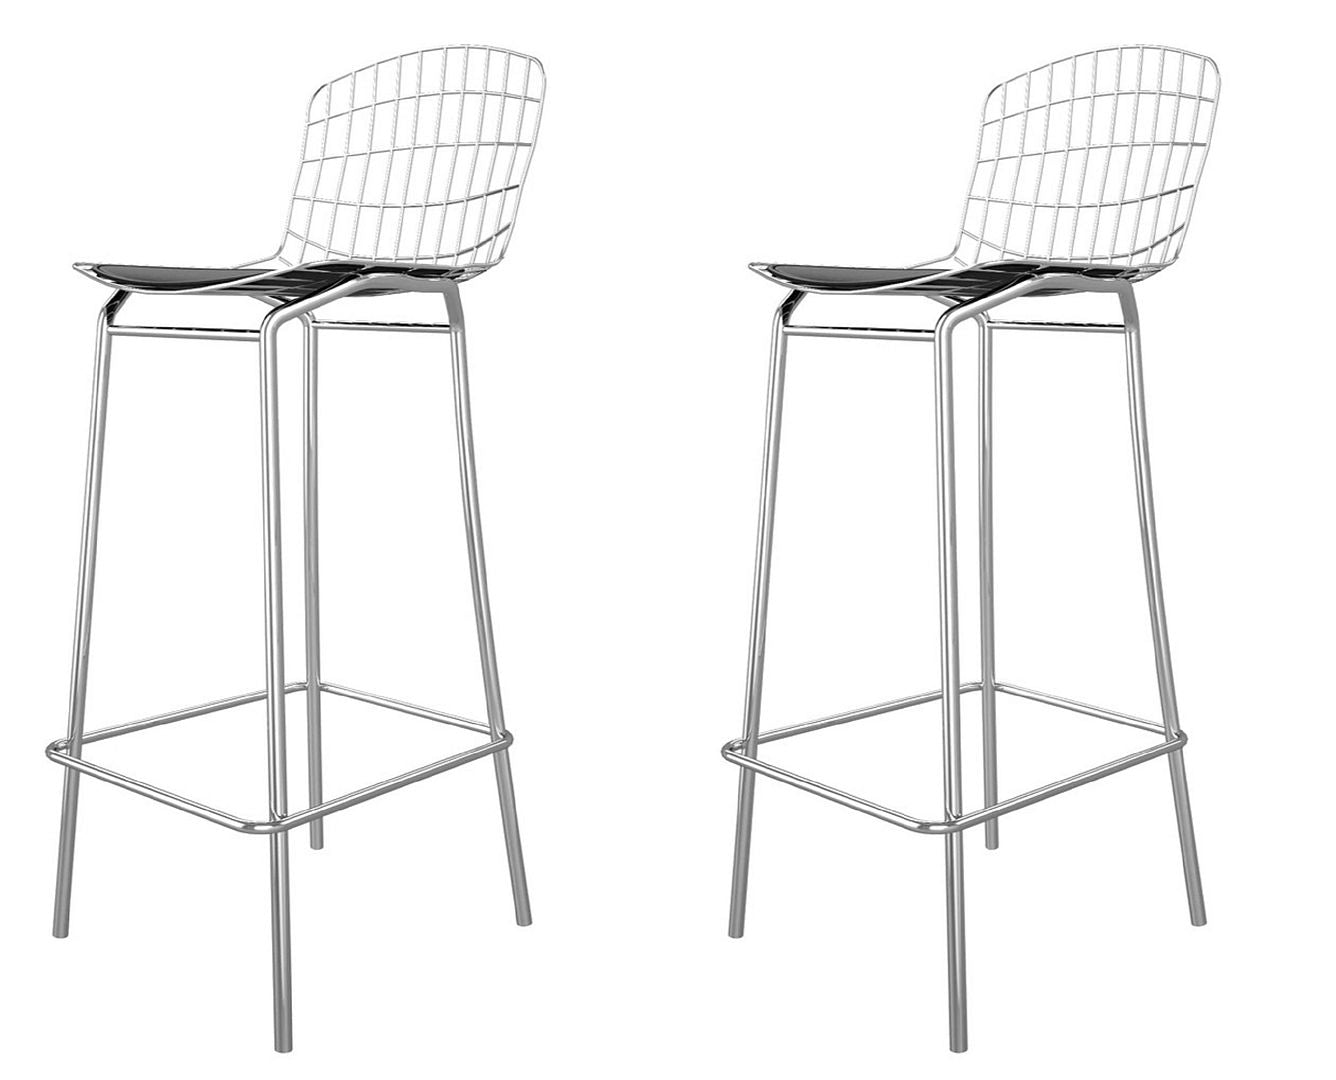 Manhattan Comfort Madeline 41.73" Barstool in Silver and Black (Set of 2)